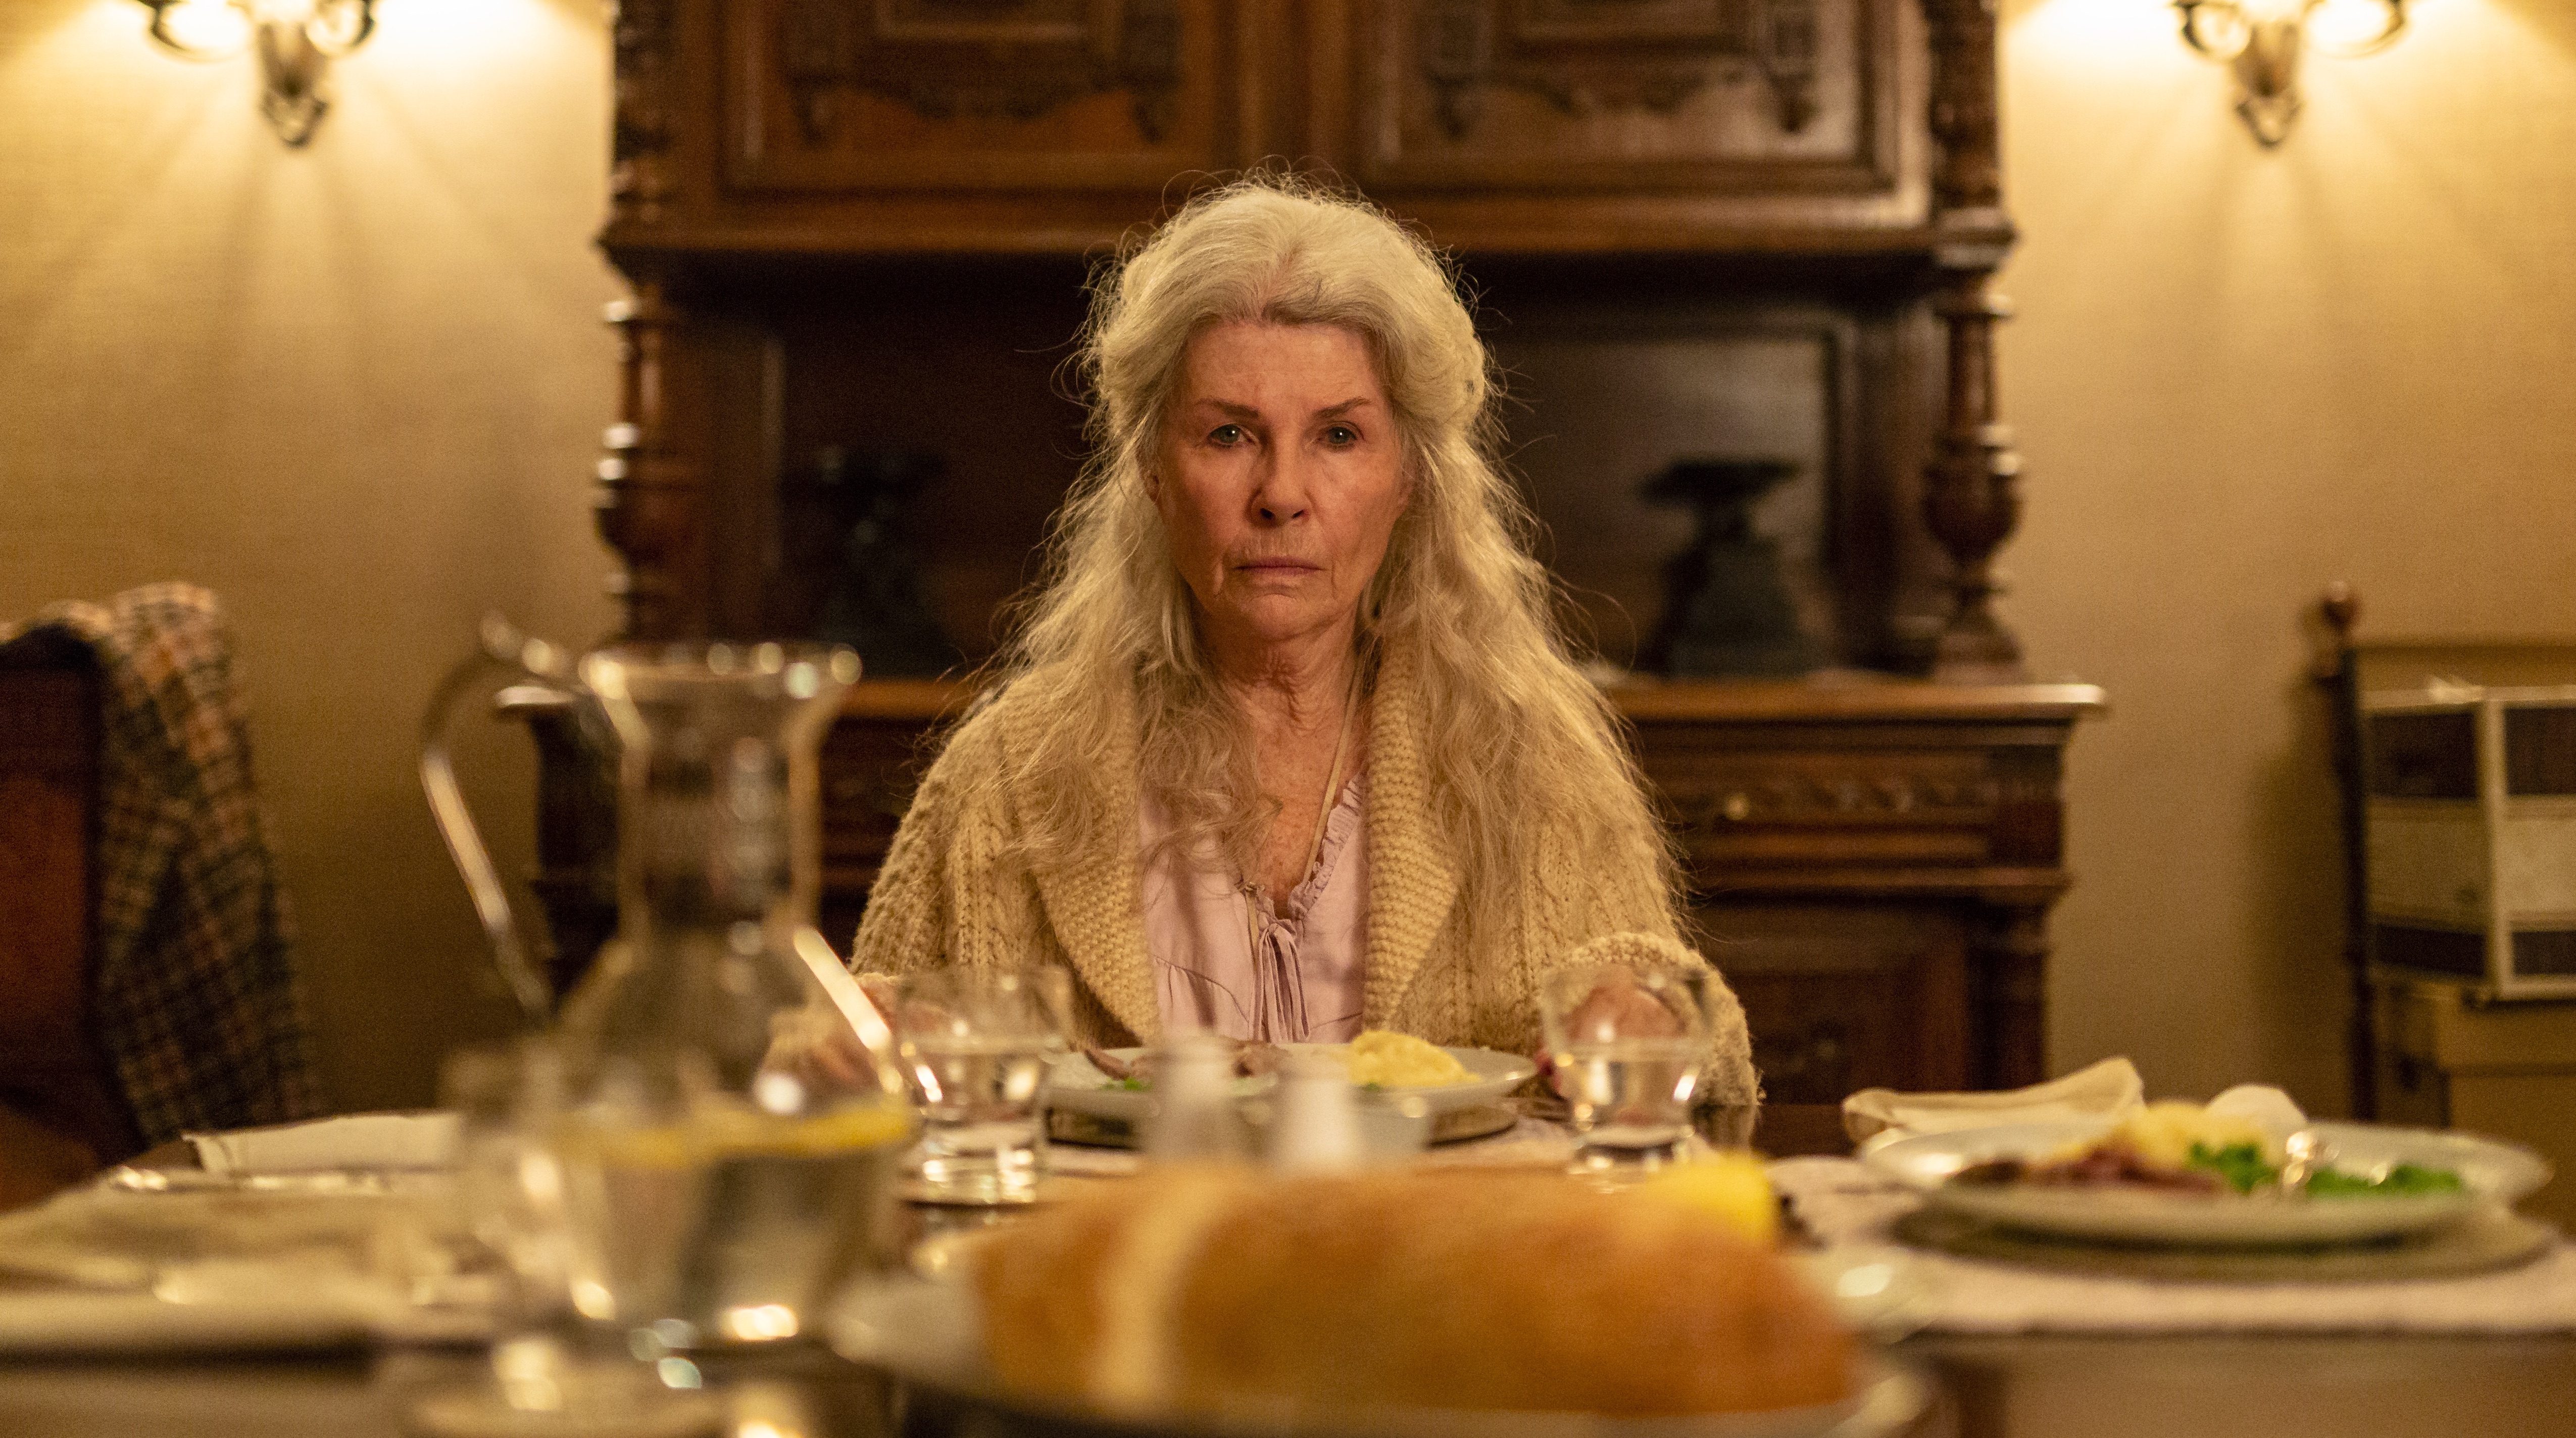 Robyn Nevin in Relic sits stone-faced at the dinner table, surrounded by untouched food.